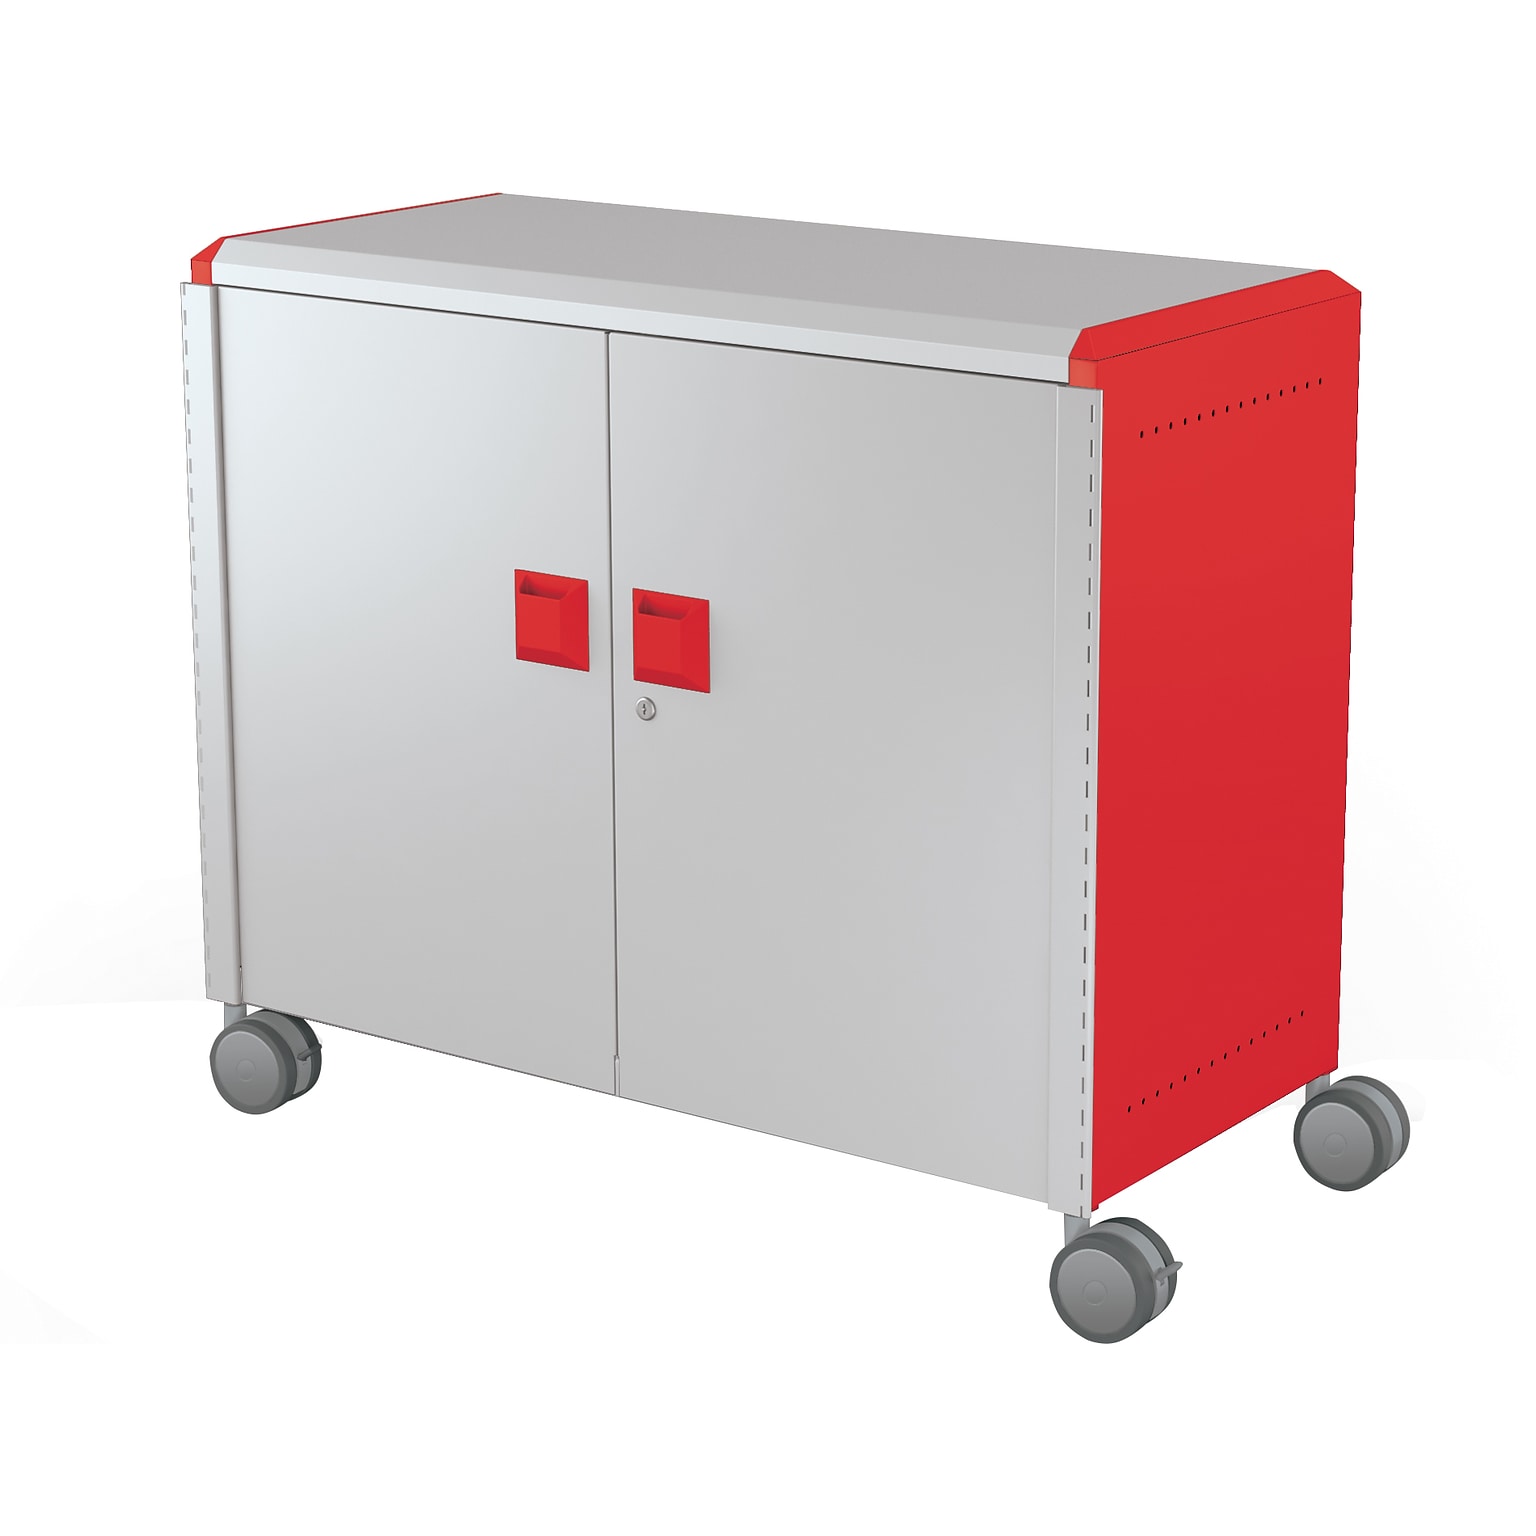 MooreCo Compass Maxi H2 Mobile 9-Section Storage Cabinet, 36.13H x 41.88W x 19.13D, Platinum/Red Metal (B3A1C2E1X0)